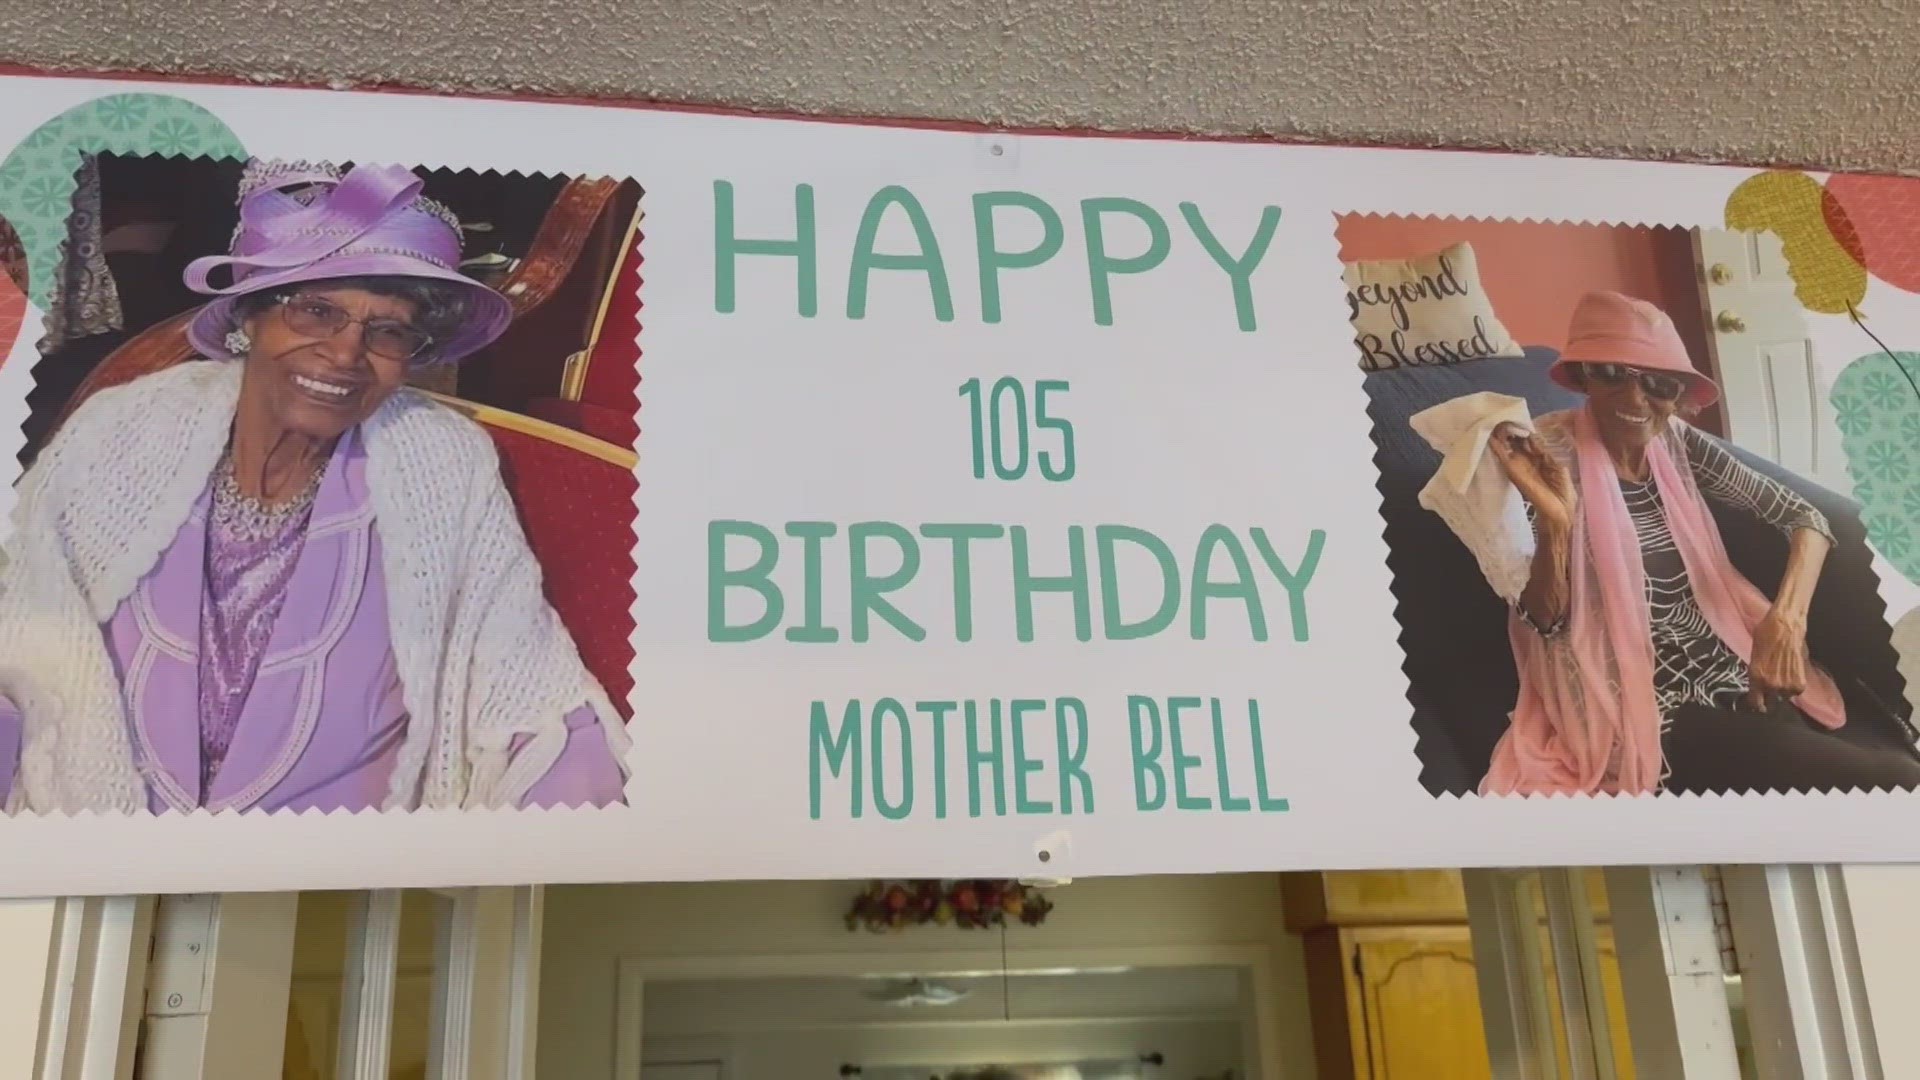 Mother Bell is a testament to Black History still being made today.